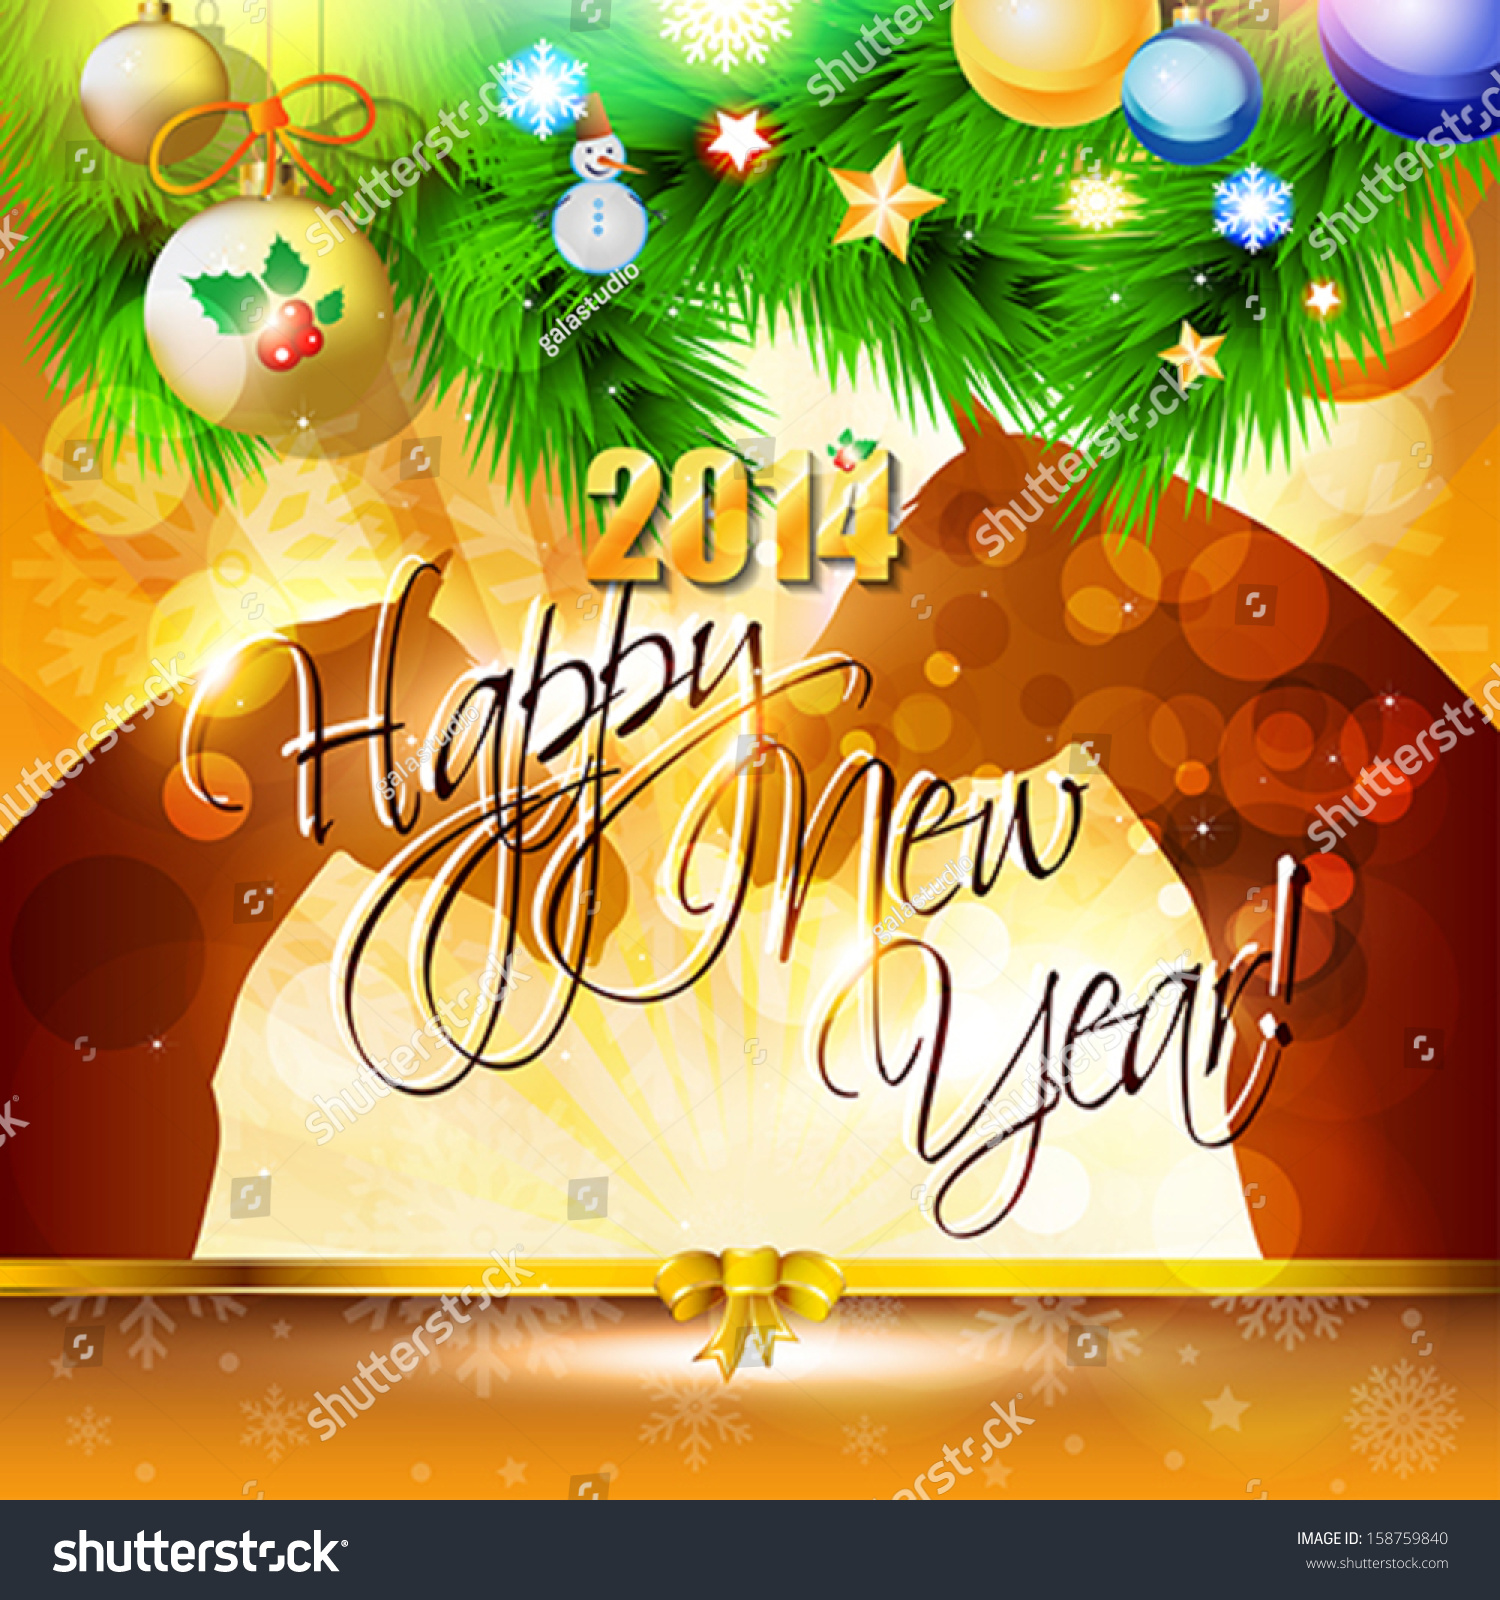 2014 Happy New Year card or background with horse, balls, snowflakes and stars.  Vector illustration. #158759840